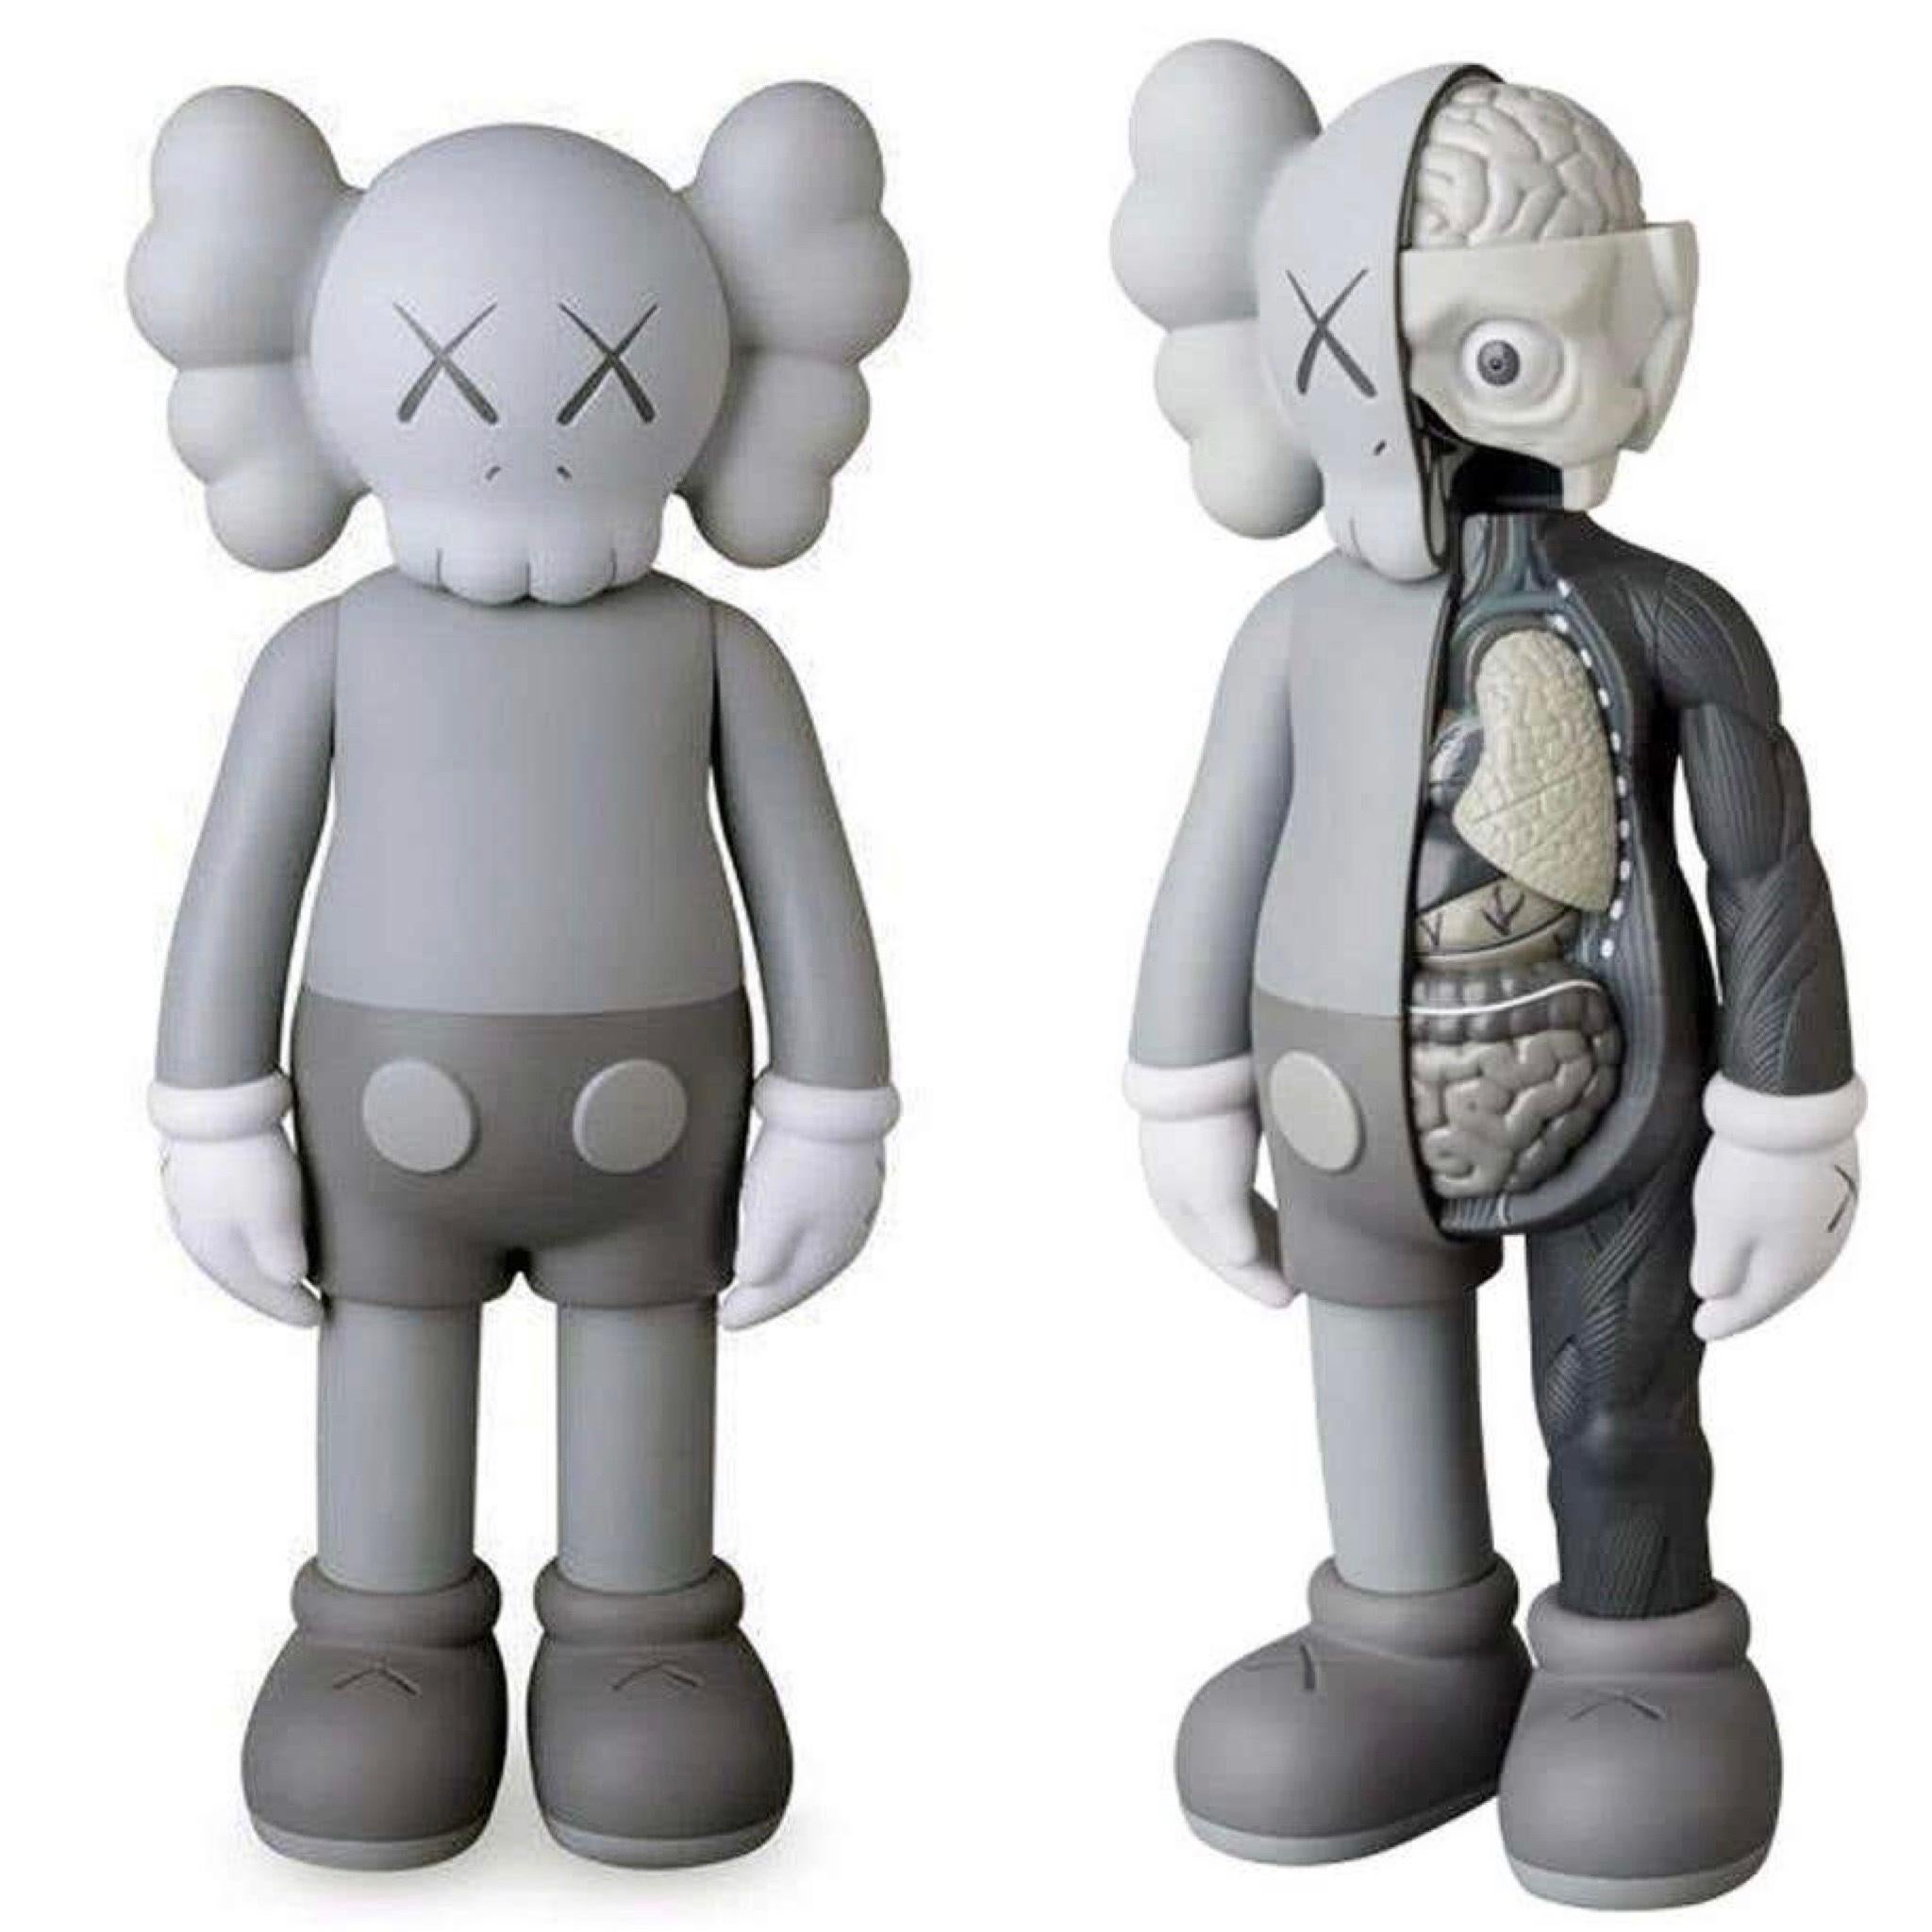 KAWS Grey Companion's, 2016: set of 2. New and sealed in their original packaging. Published by Medicom Japan in conjunction with the exhibition, KAWS: Where The End Starts at the Modern Art Museum of Fort Worth. These figurines have since sold out.